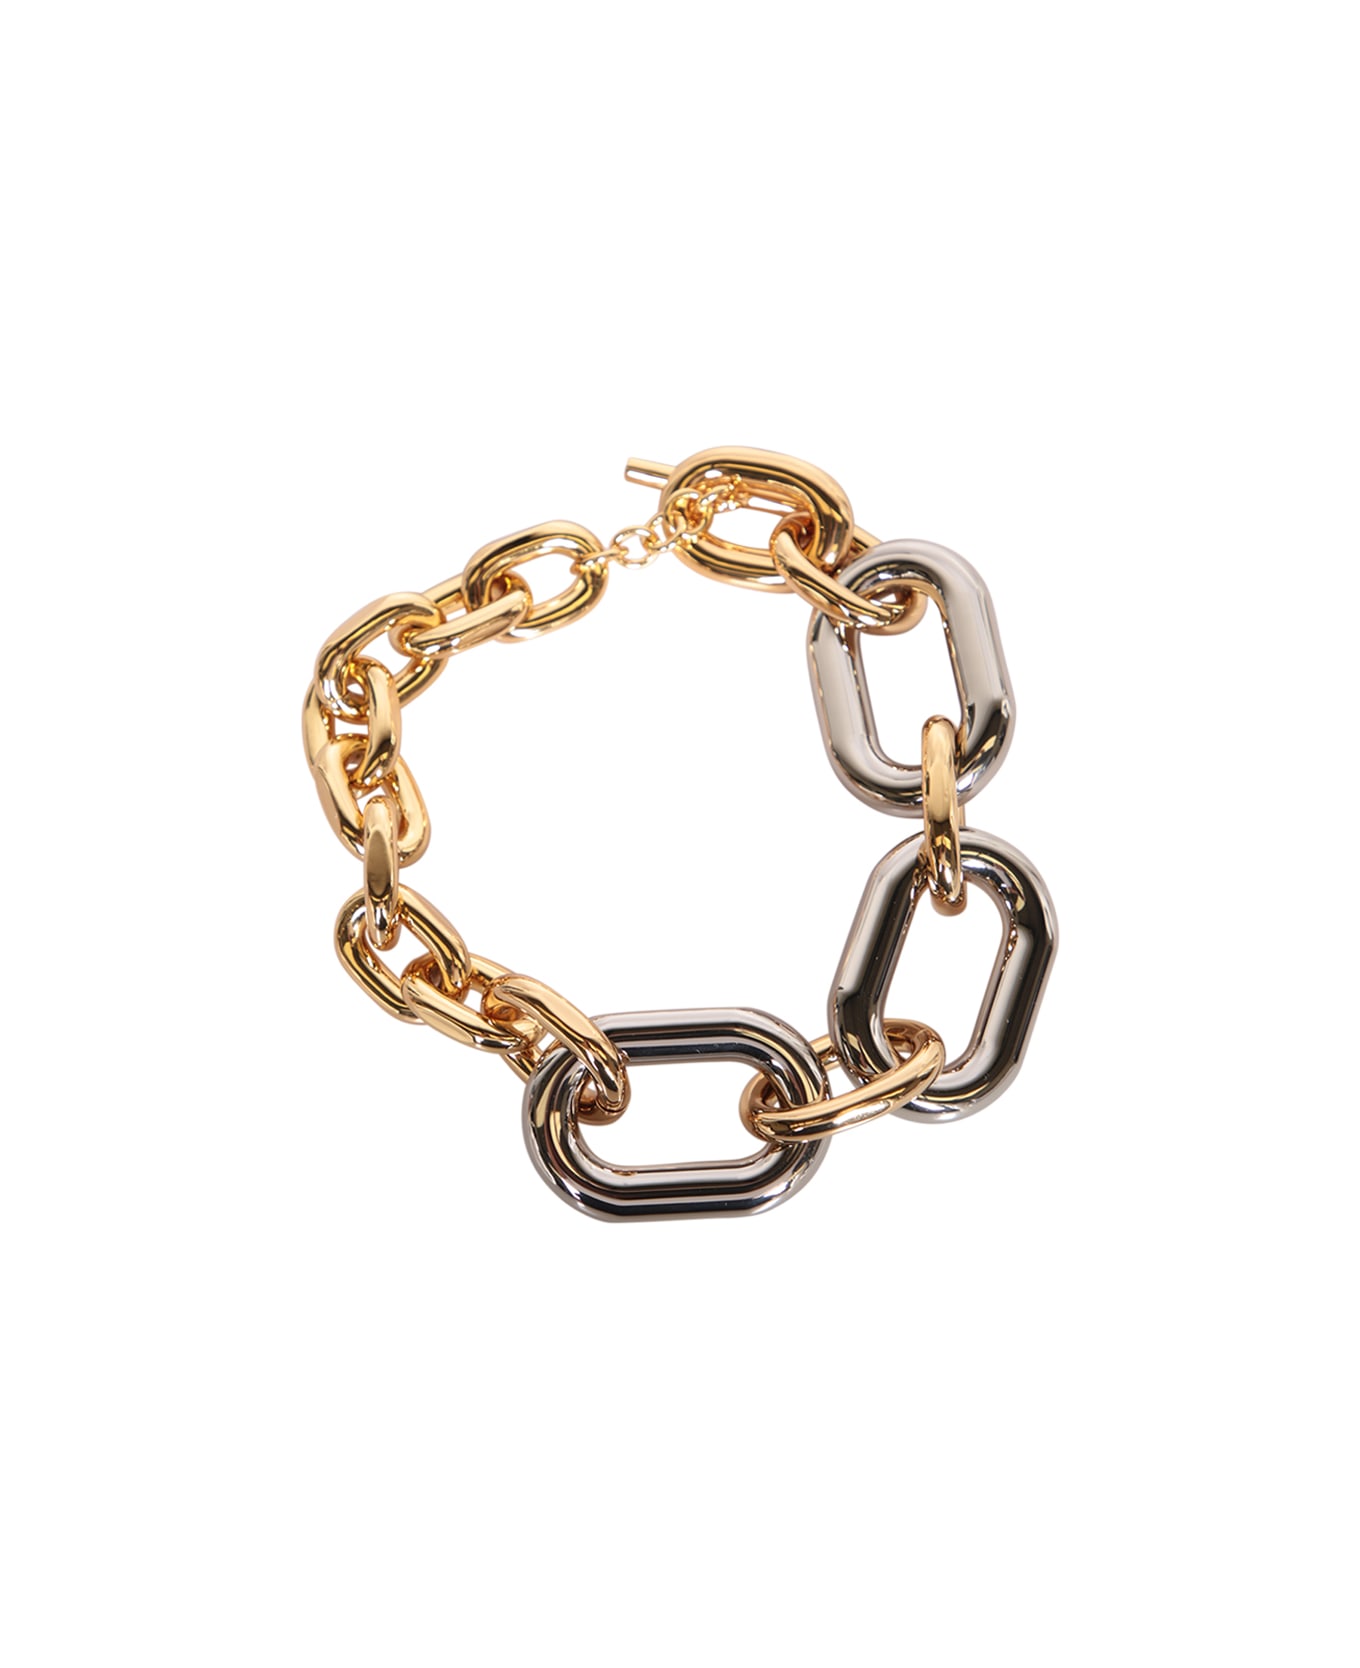 Paco Rabanne Necklace - Gold Silver